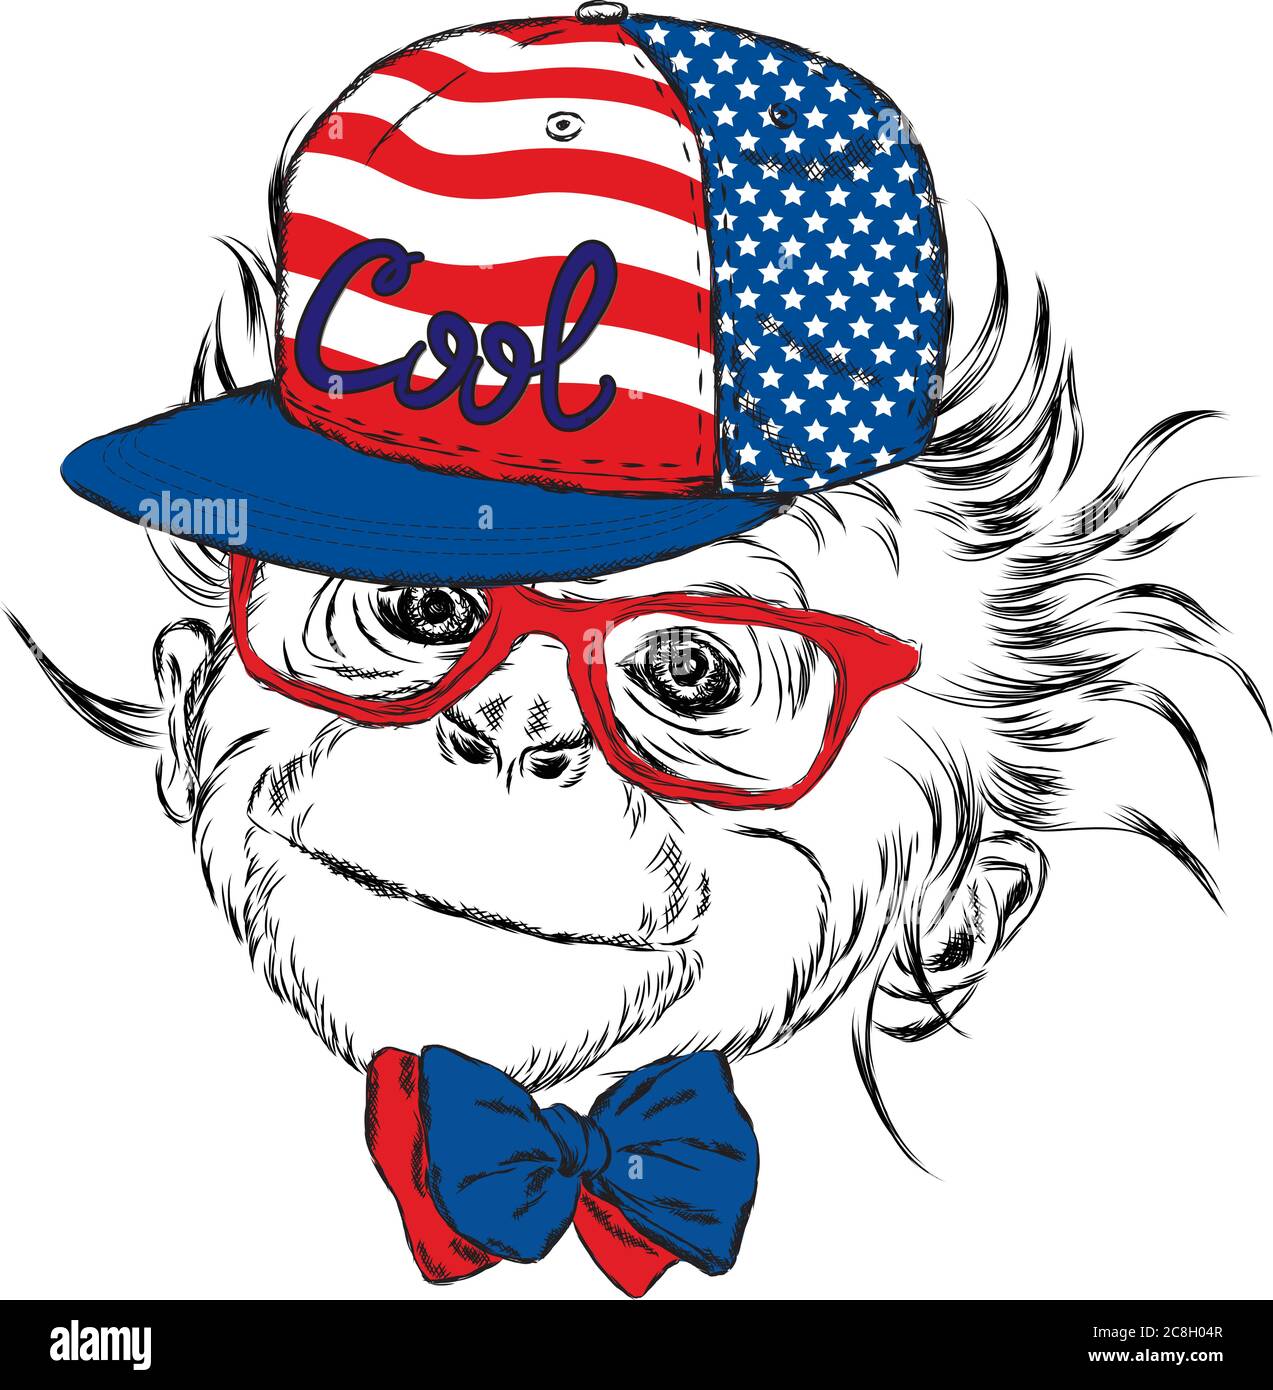 Monkey wearing a cap and sunglasses.  Vector illustration for greeting card, poster, or print on clothes. Stock Vector